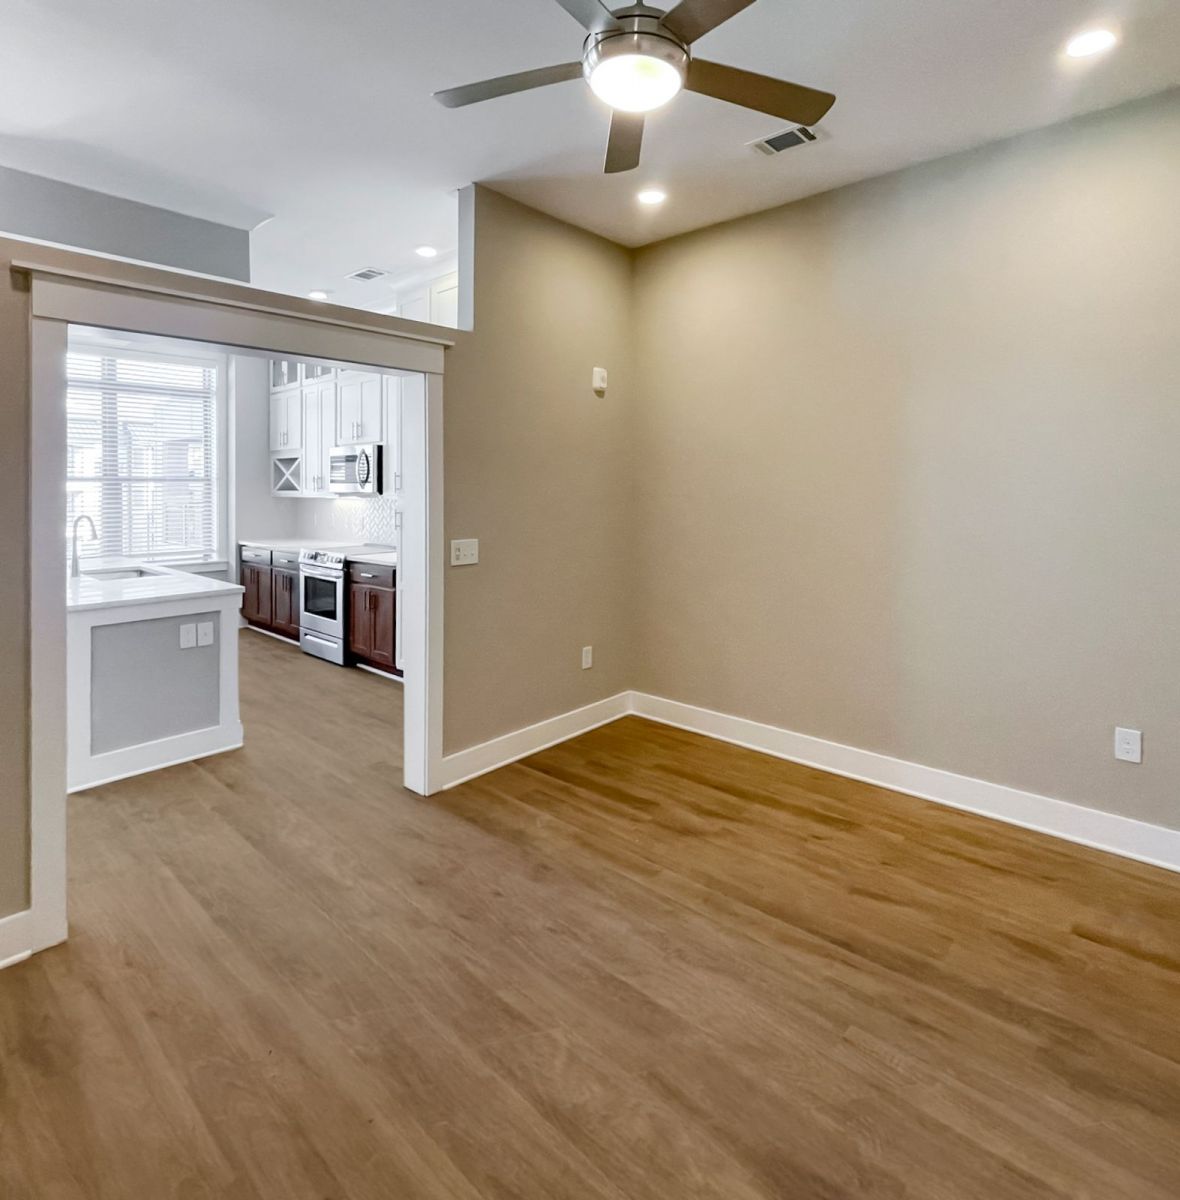 Luxury Charlotte apartment interior with vinyl plank, kitchen island, and ceiling fan